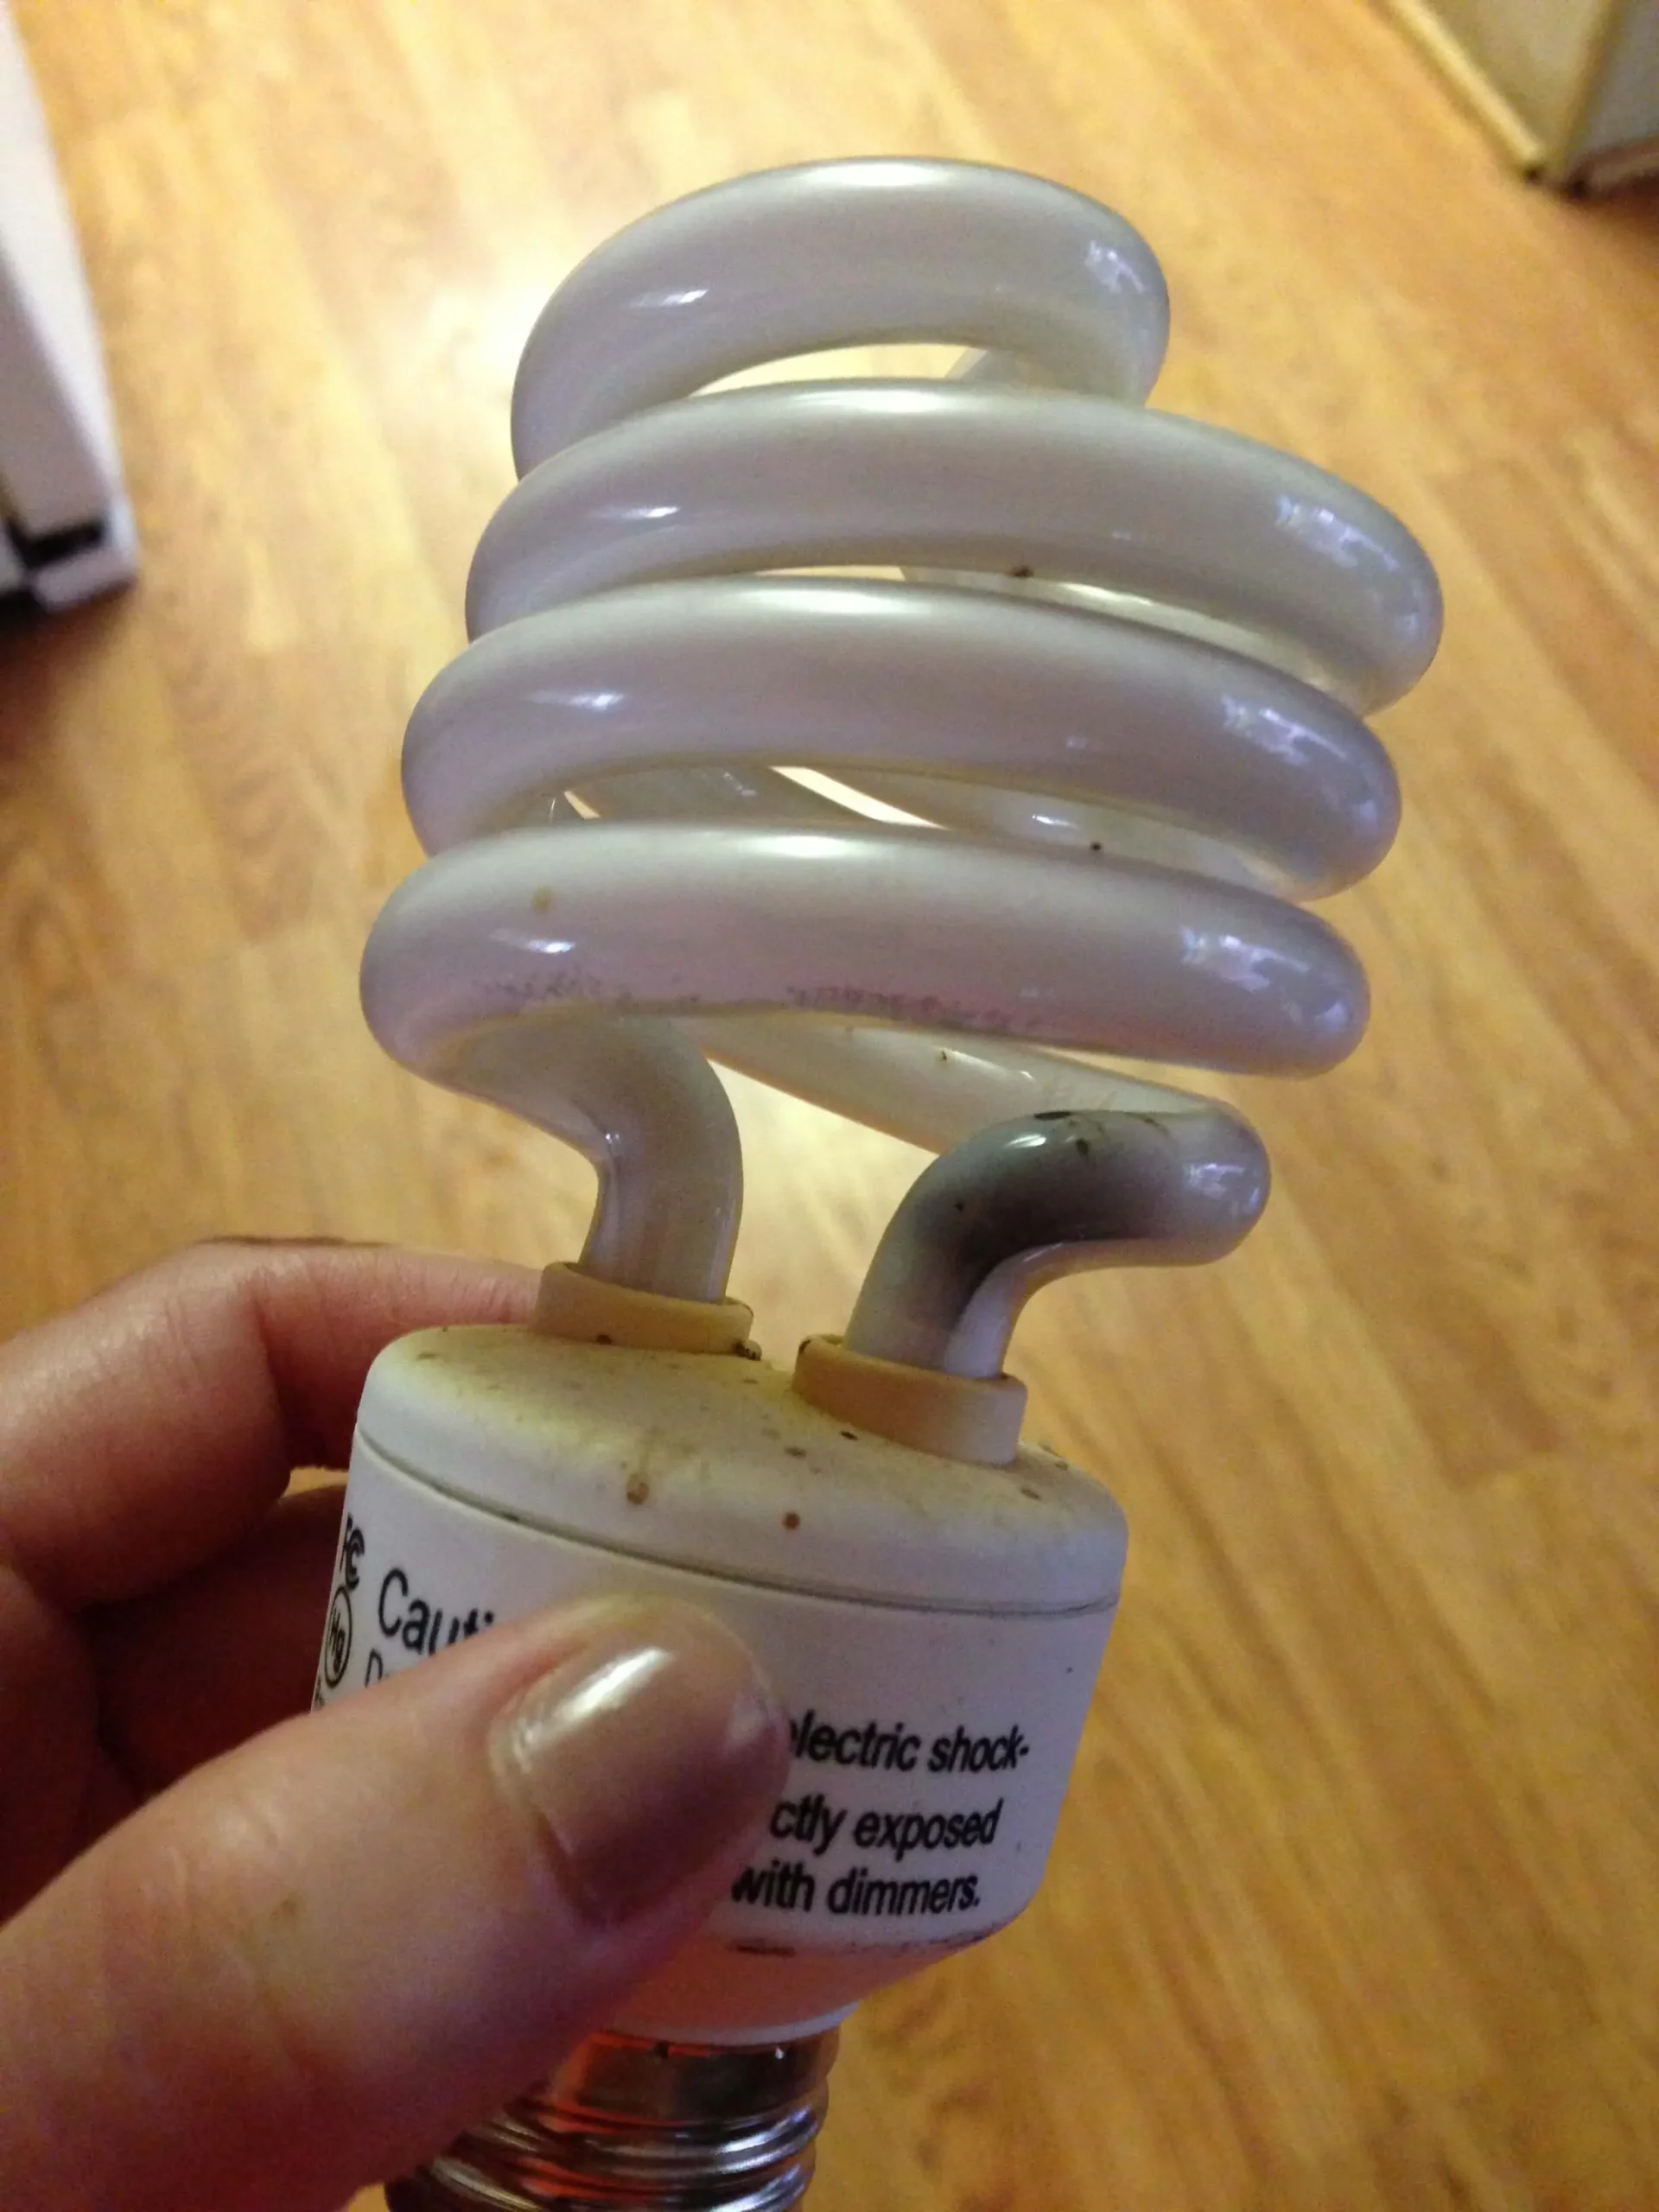 led light bulb burned out and smoked - Can LED lights overheat and cause a fire